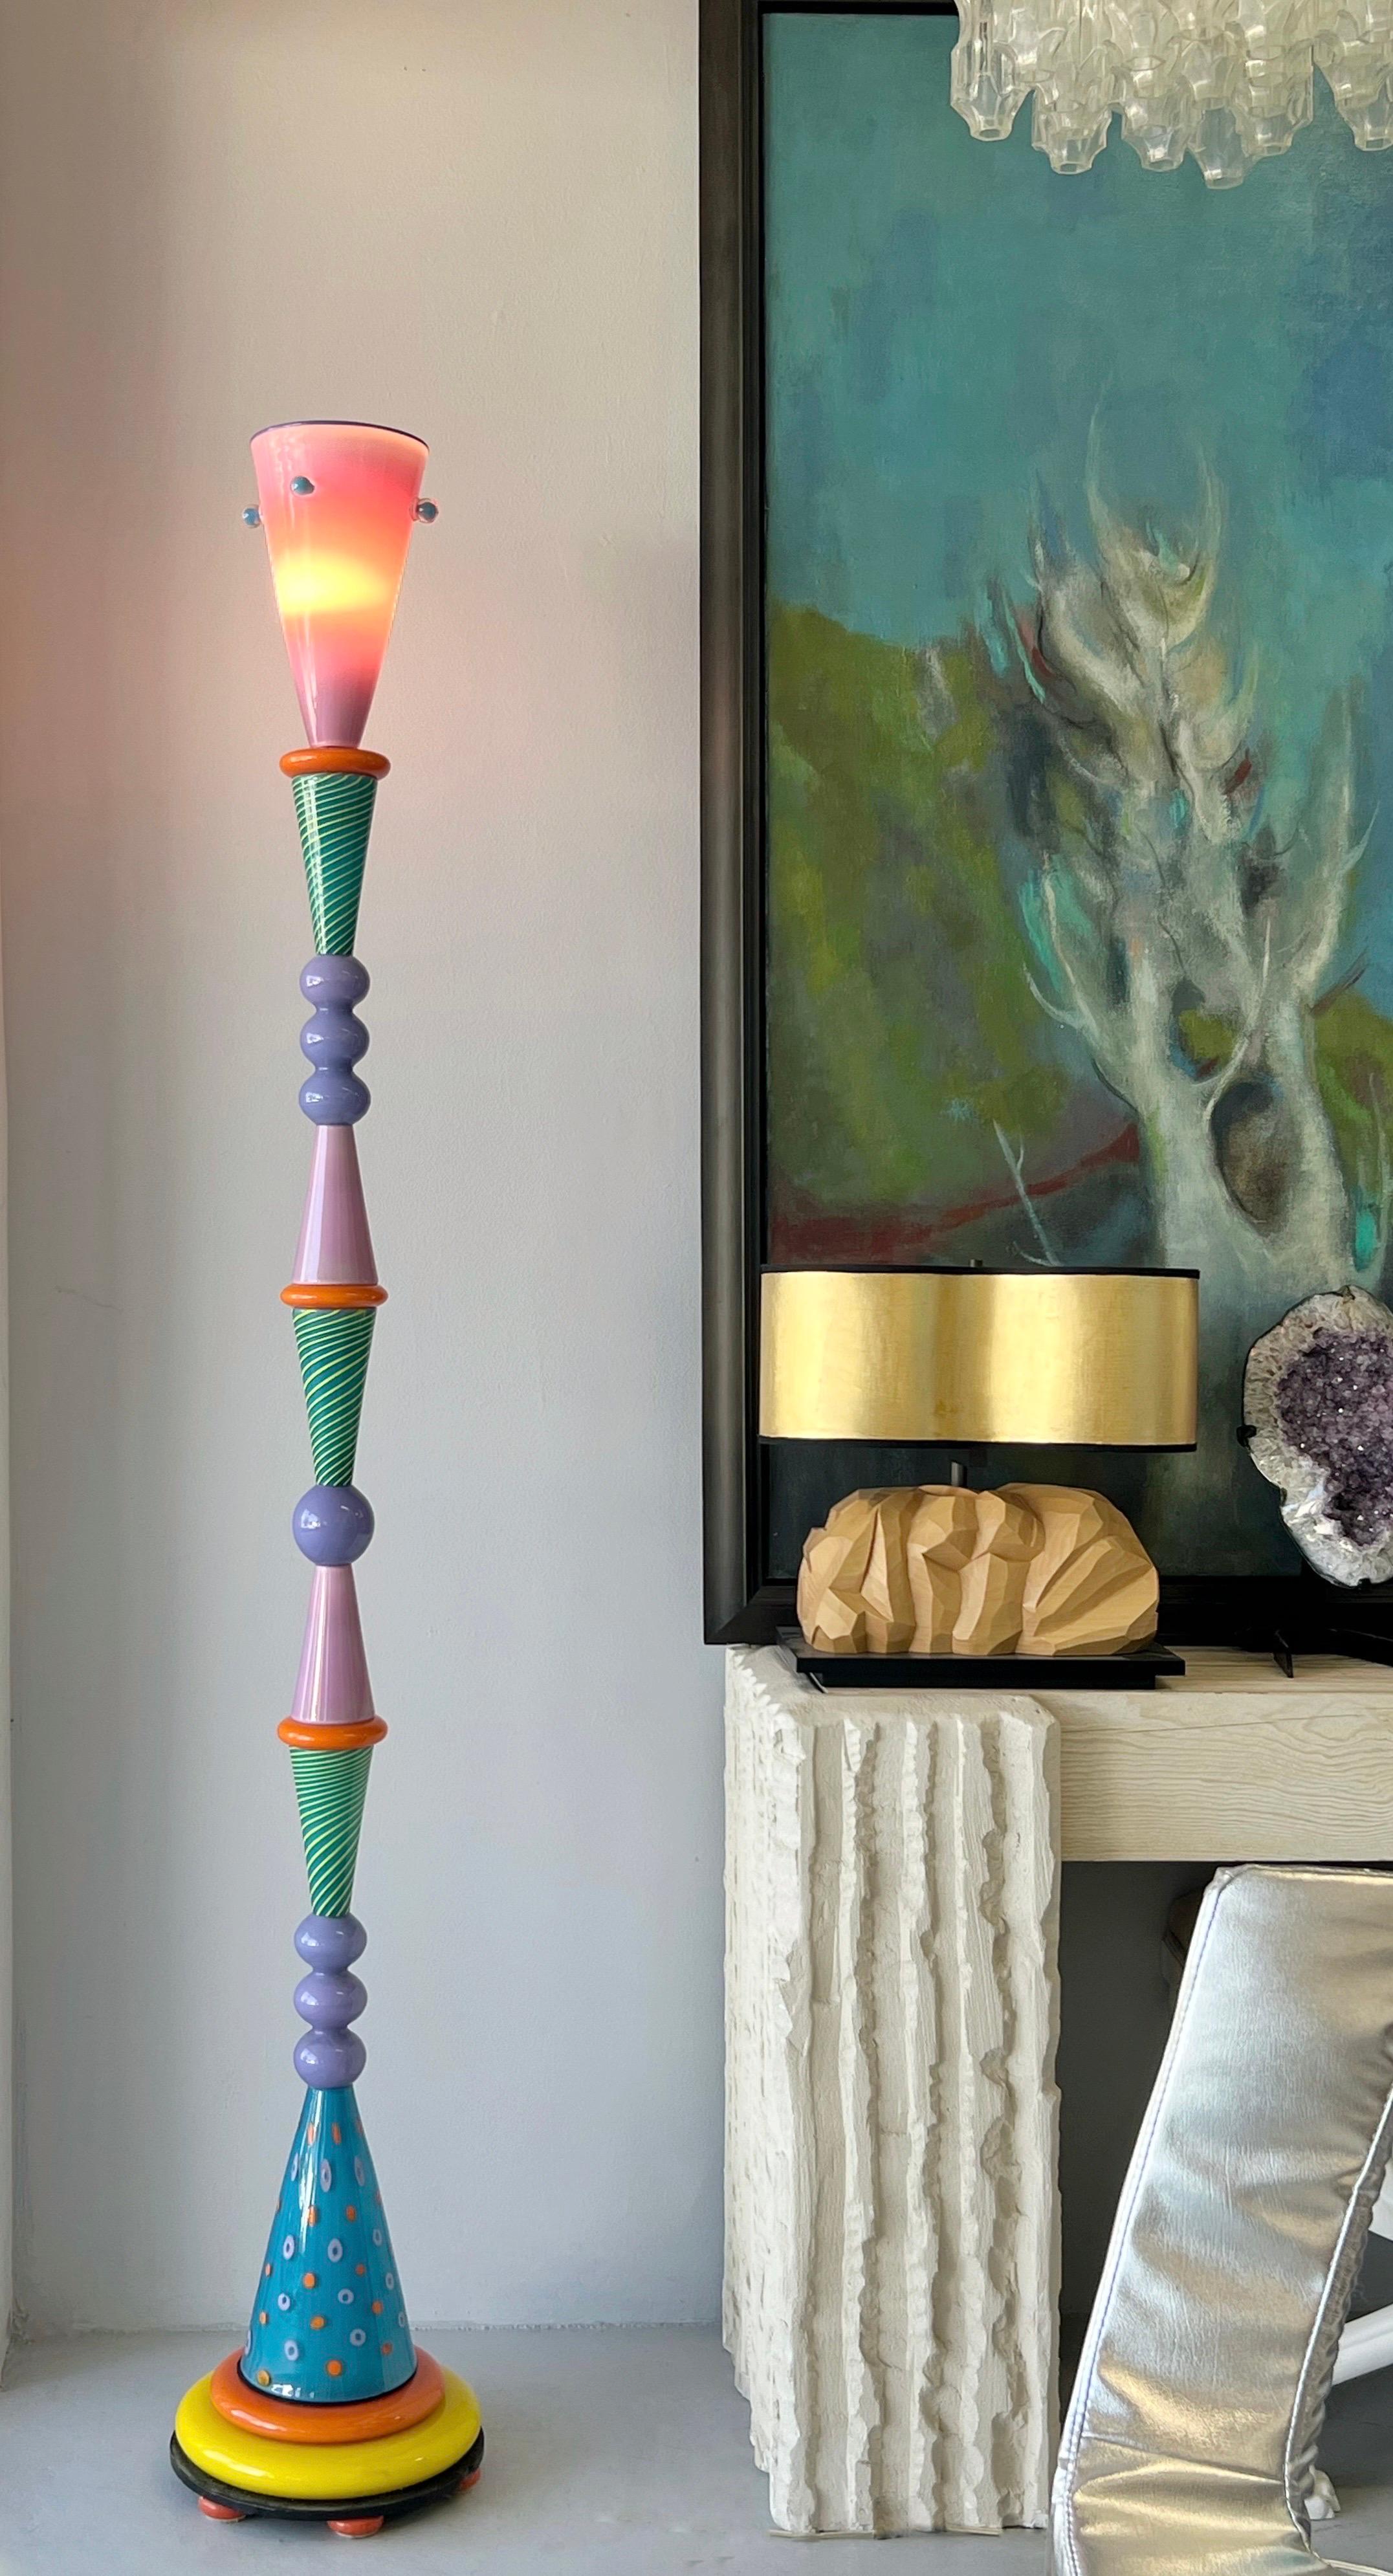 This is very tall art glass floor lamp, signed and dated 1991. The designed is graphic and colorful. Very much in the style of Memphis. Quality is extraordinary. Signature illegible.